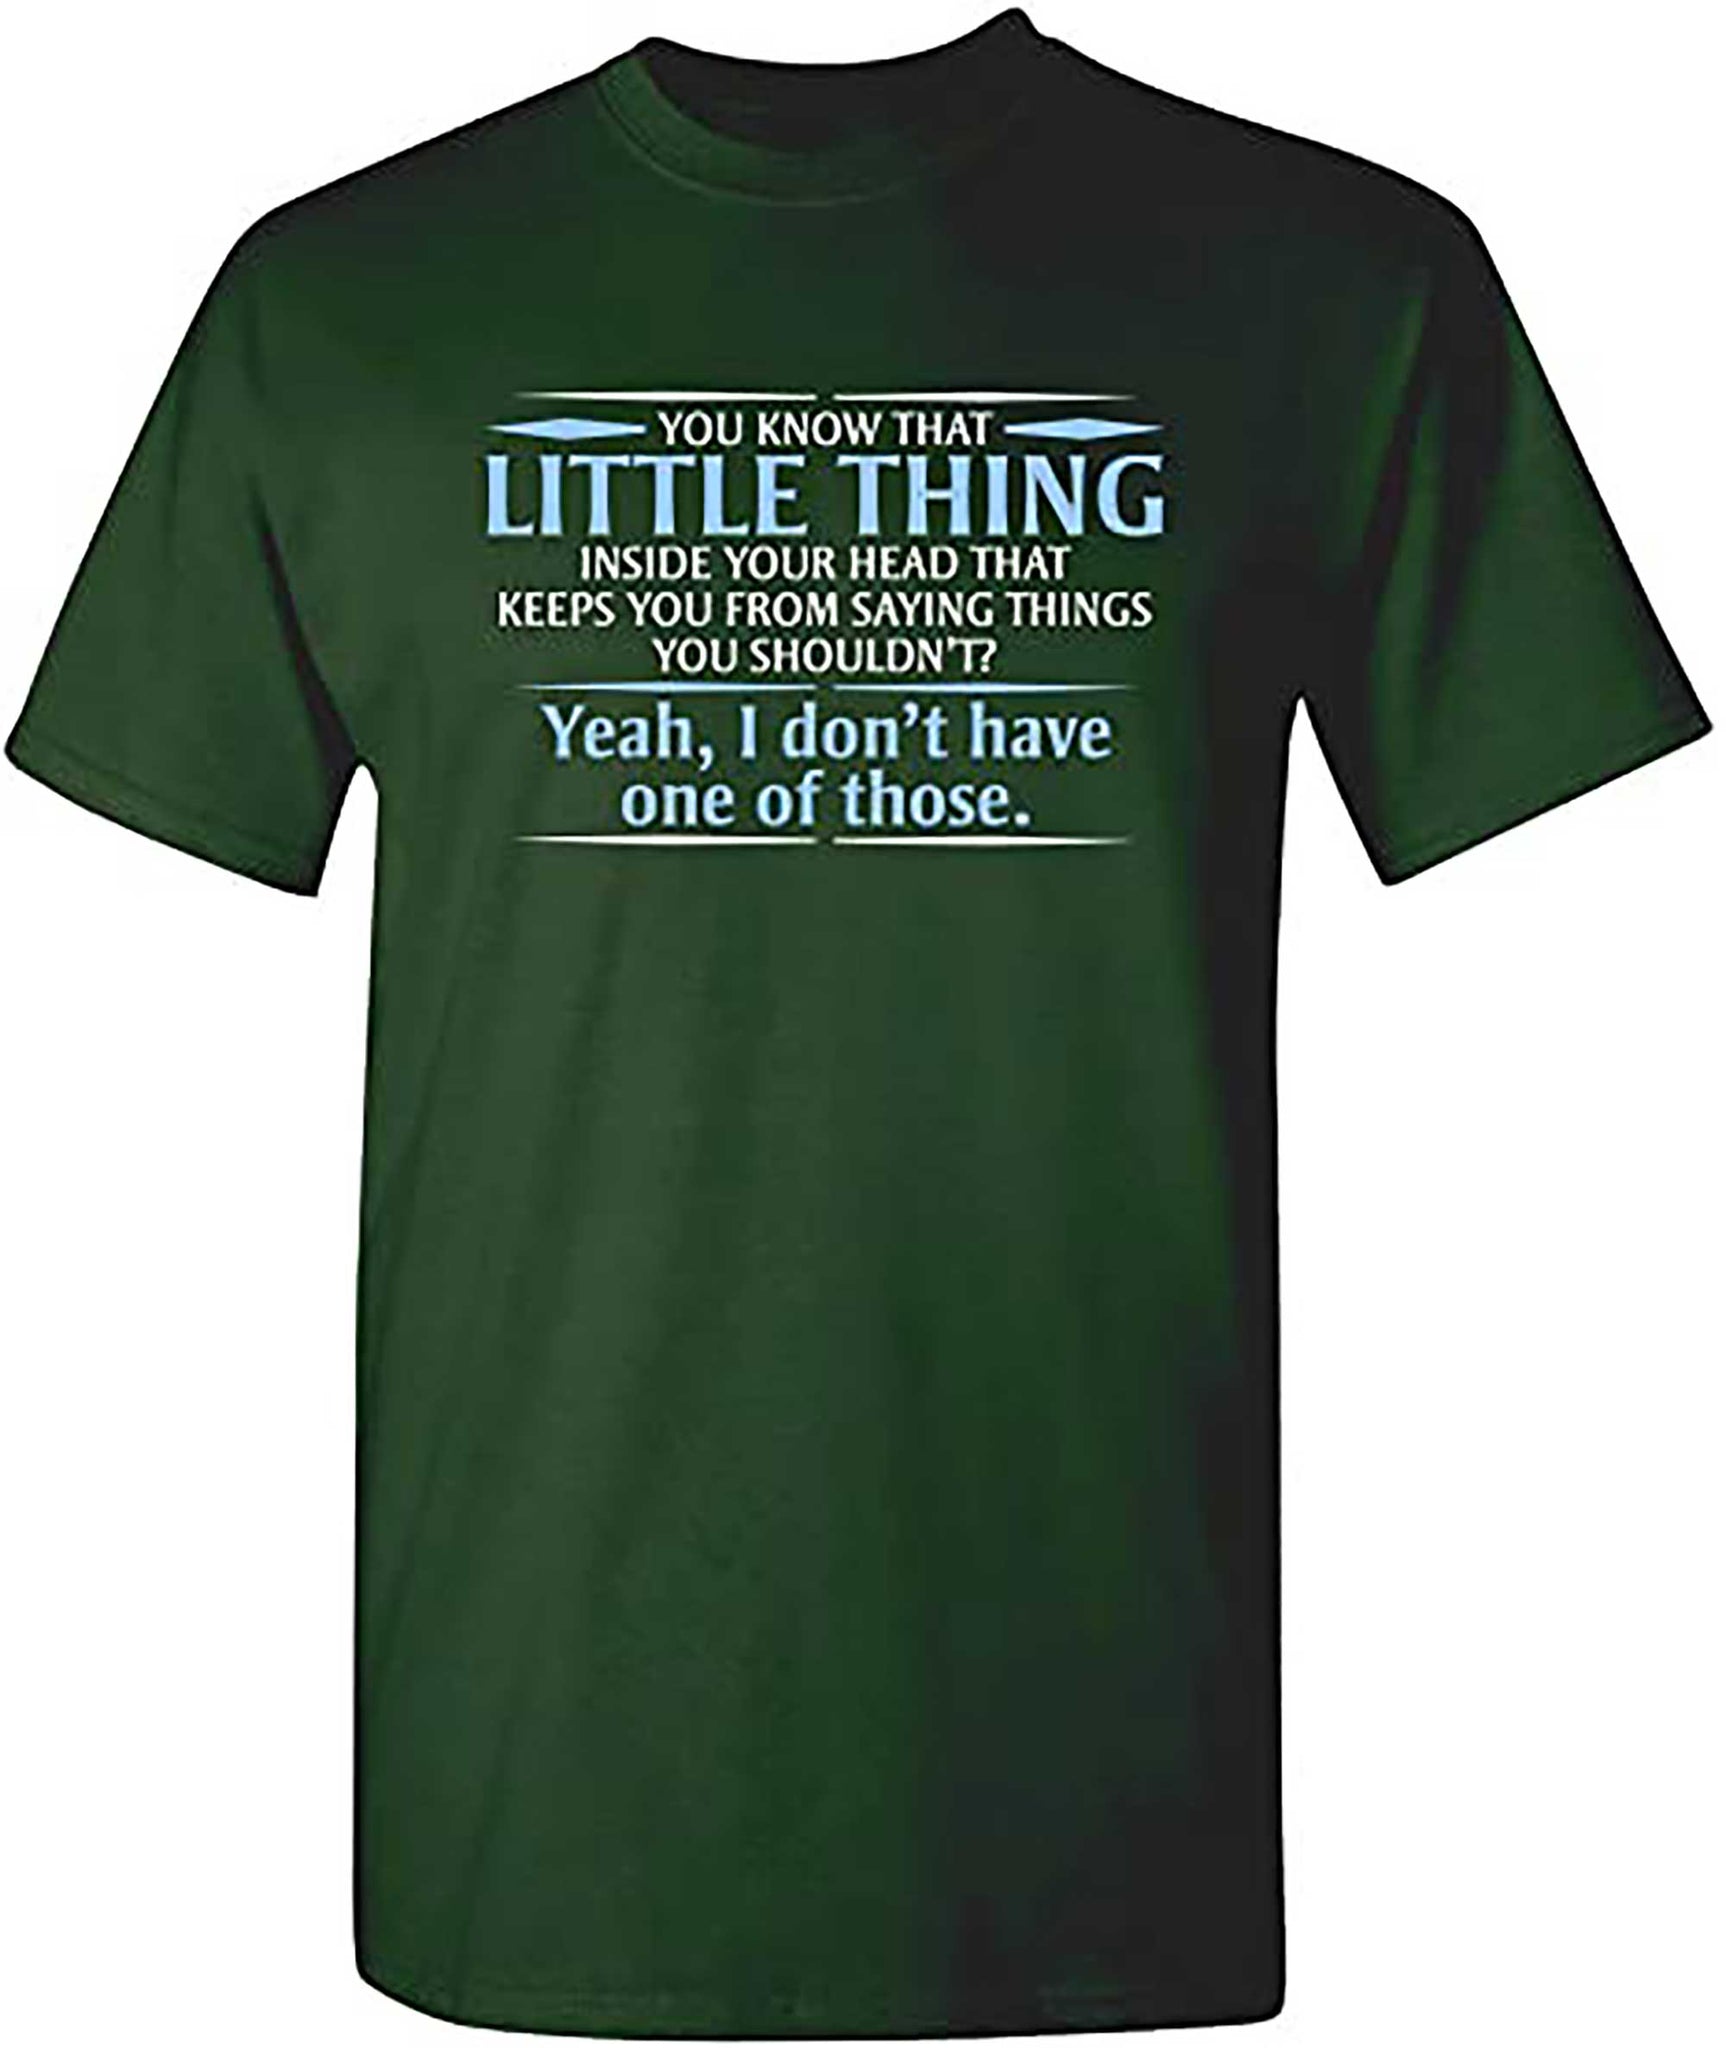 Skitongift You Know The Little Thing Cool Graphic Sarcastic Sarcasm Novelty Funny T Shirt